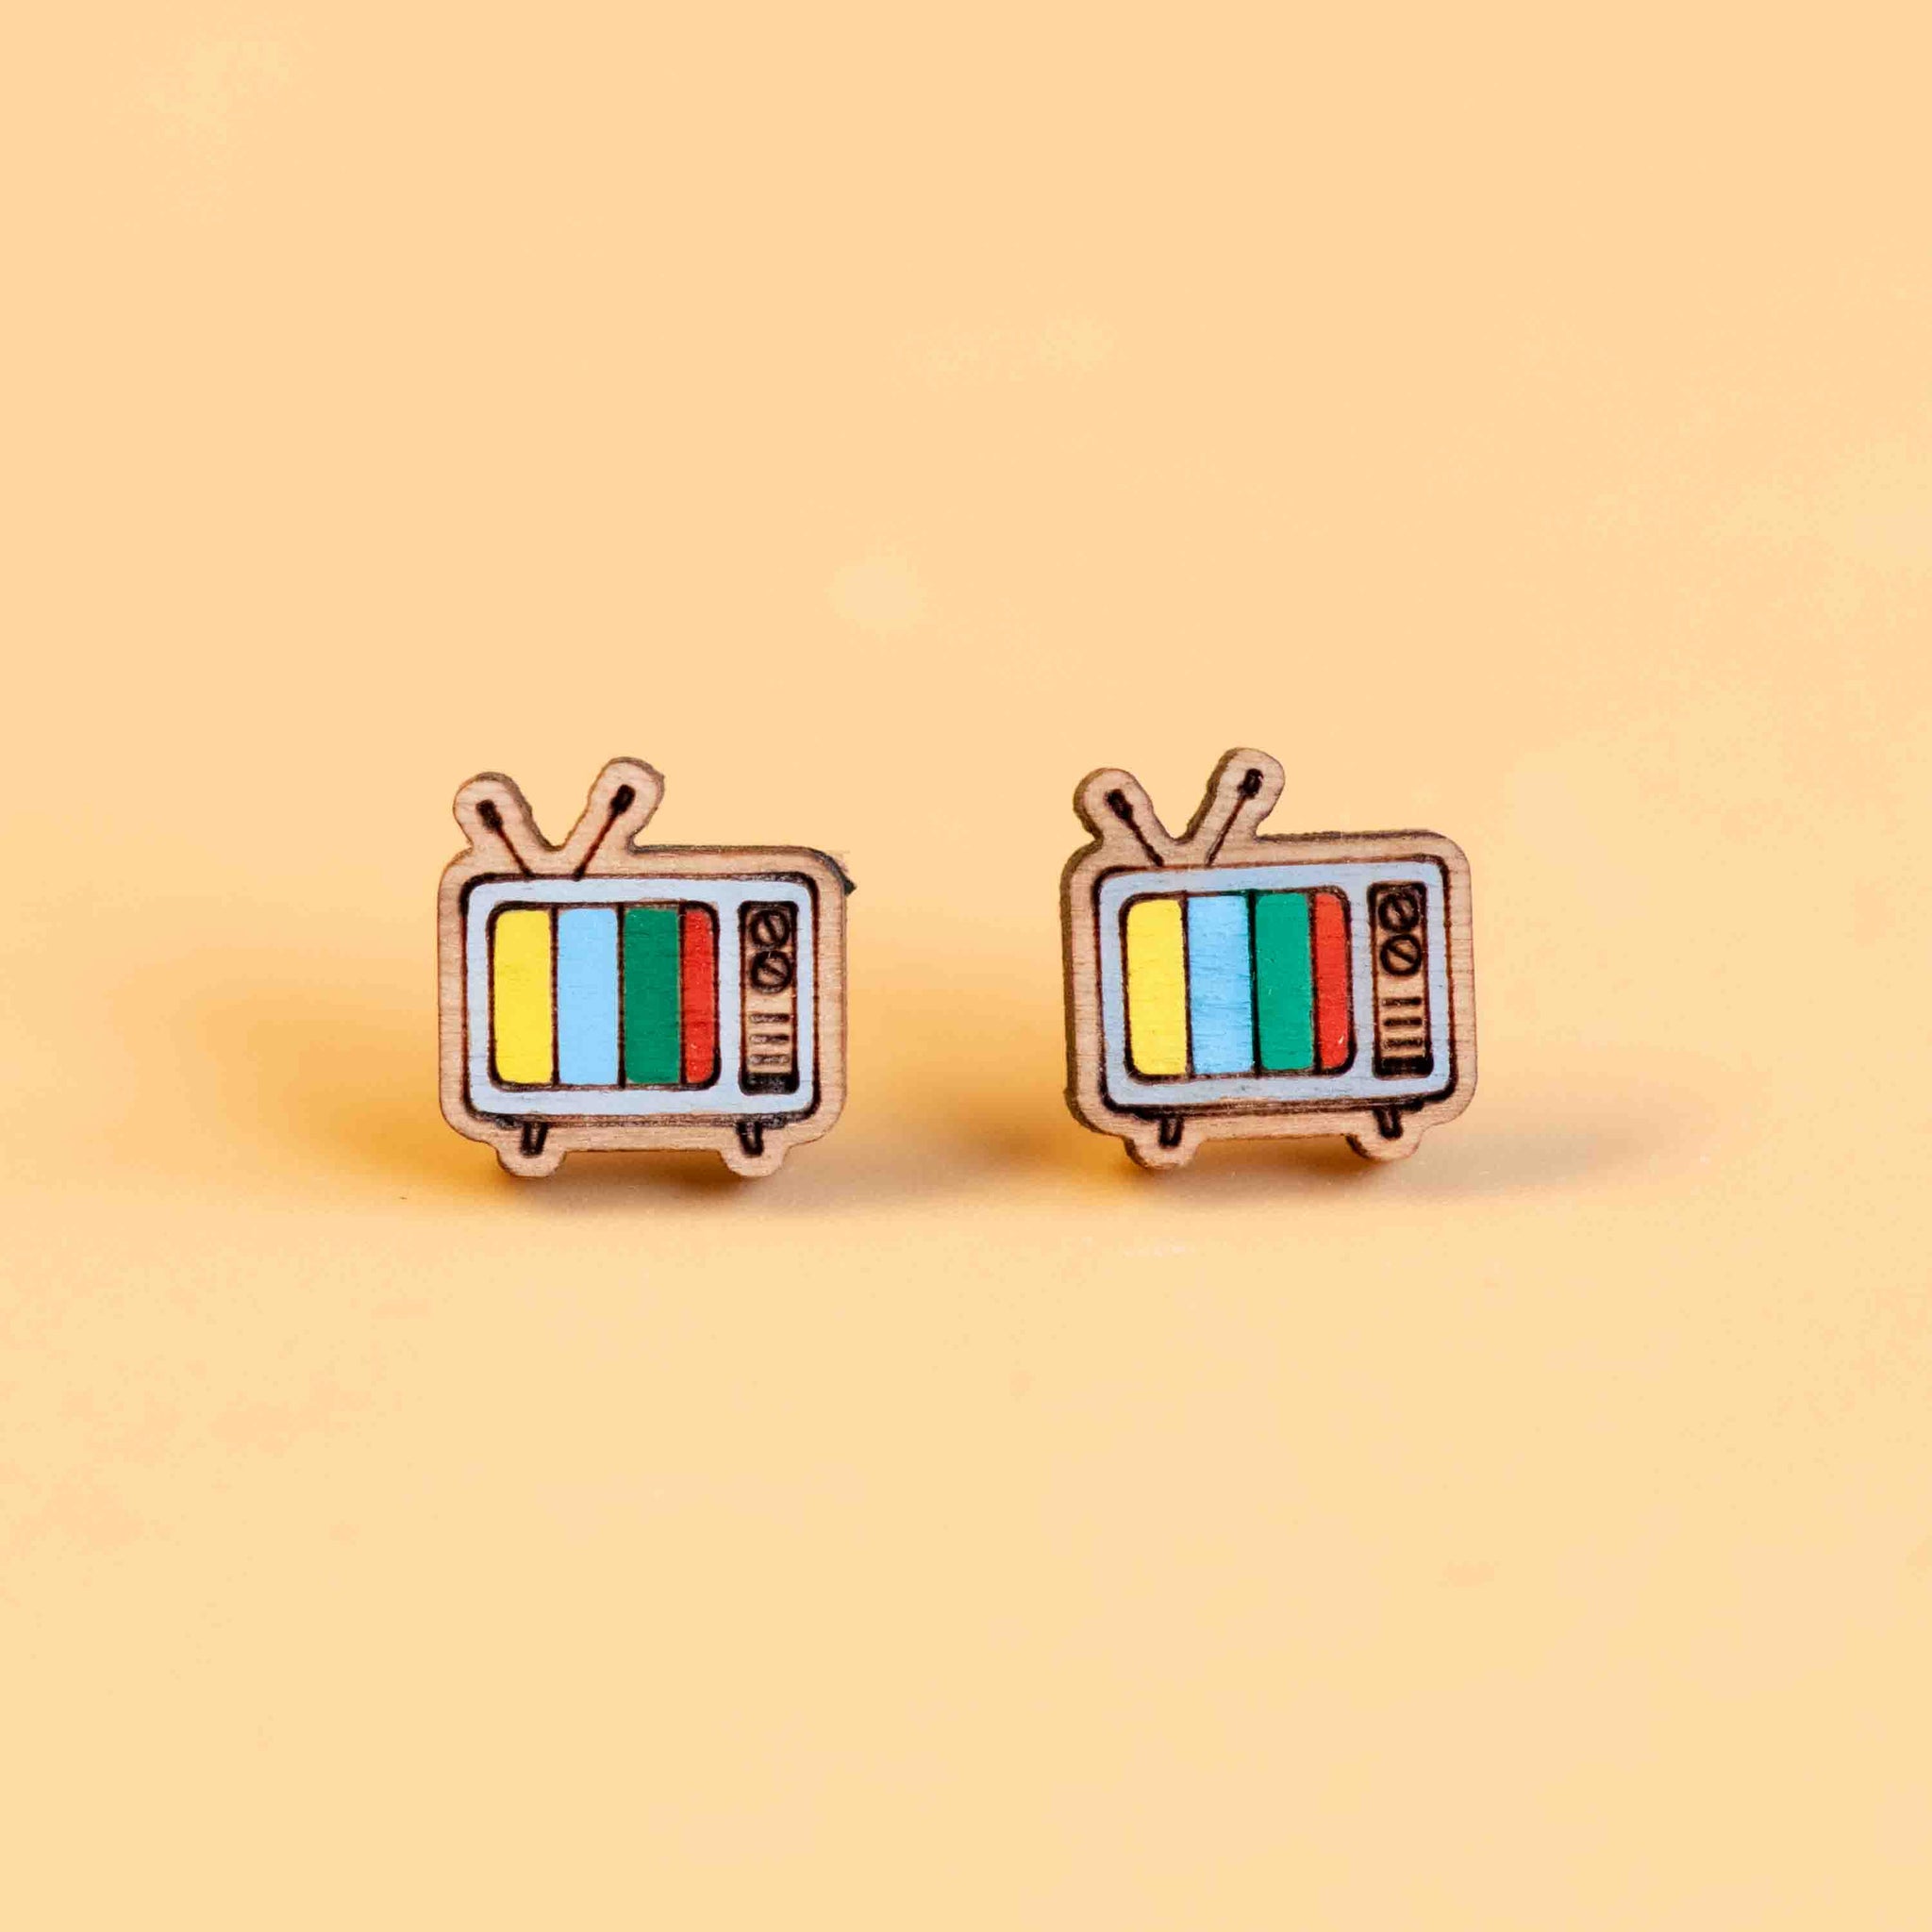 Hand-Painted Television Wooden Earrings - PET15210